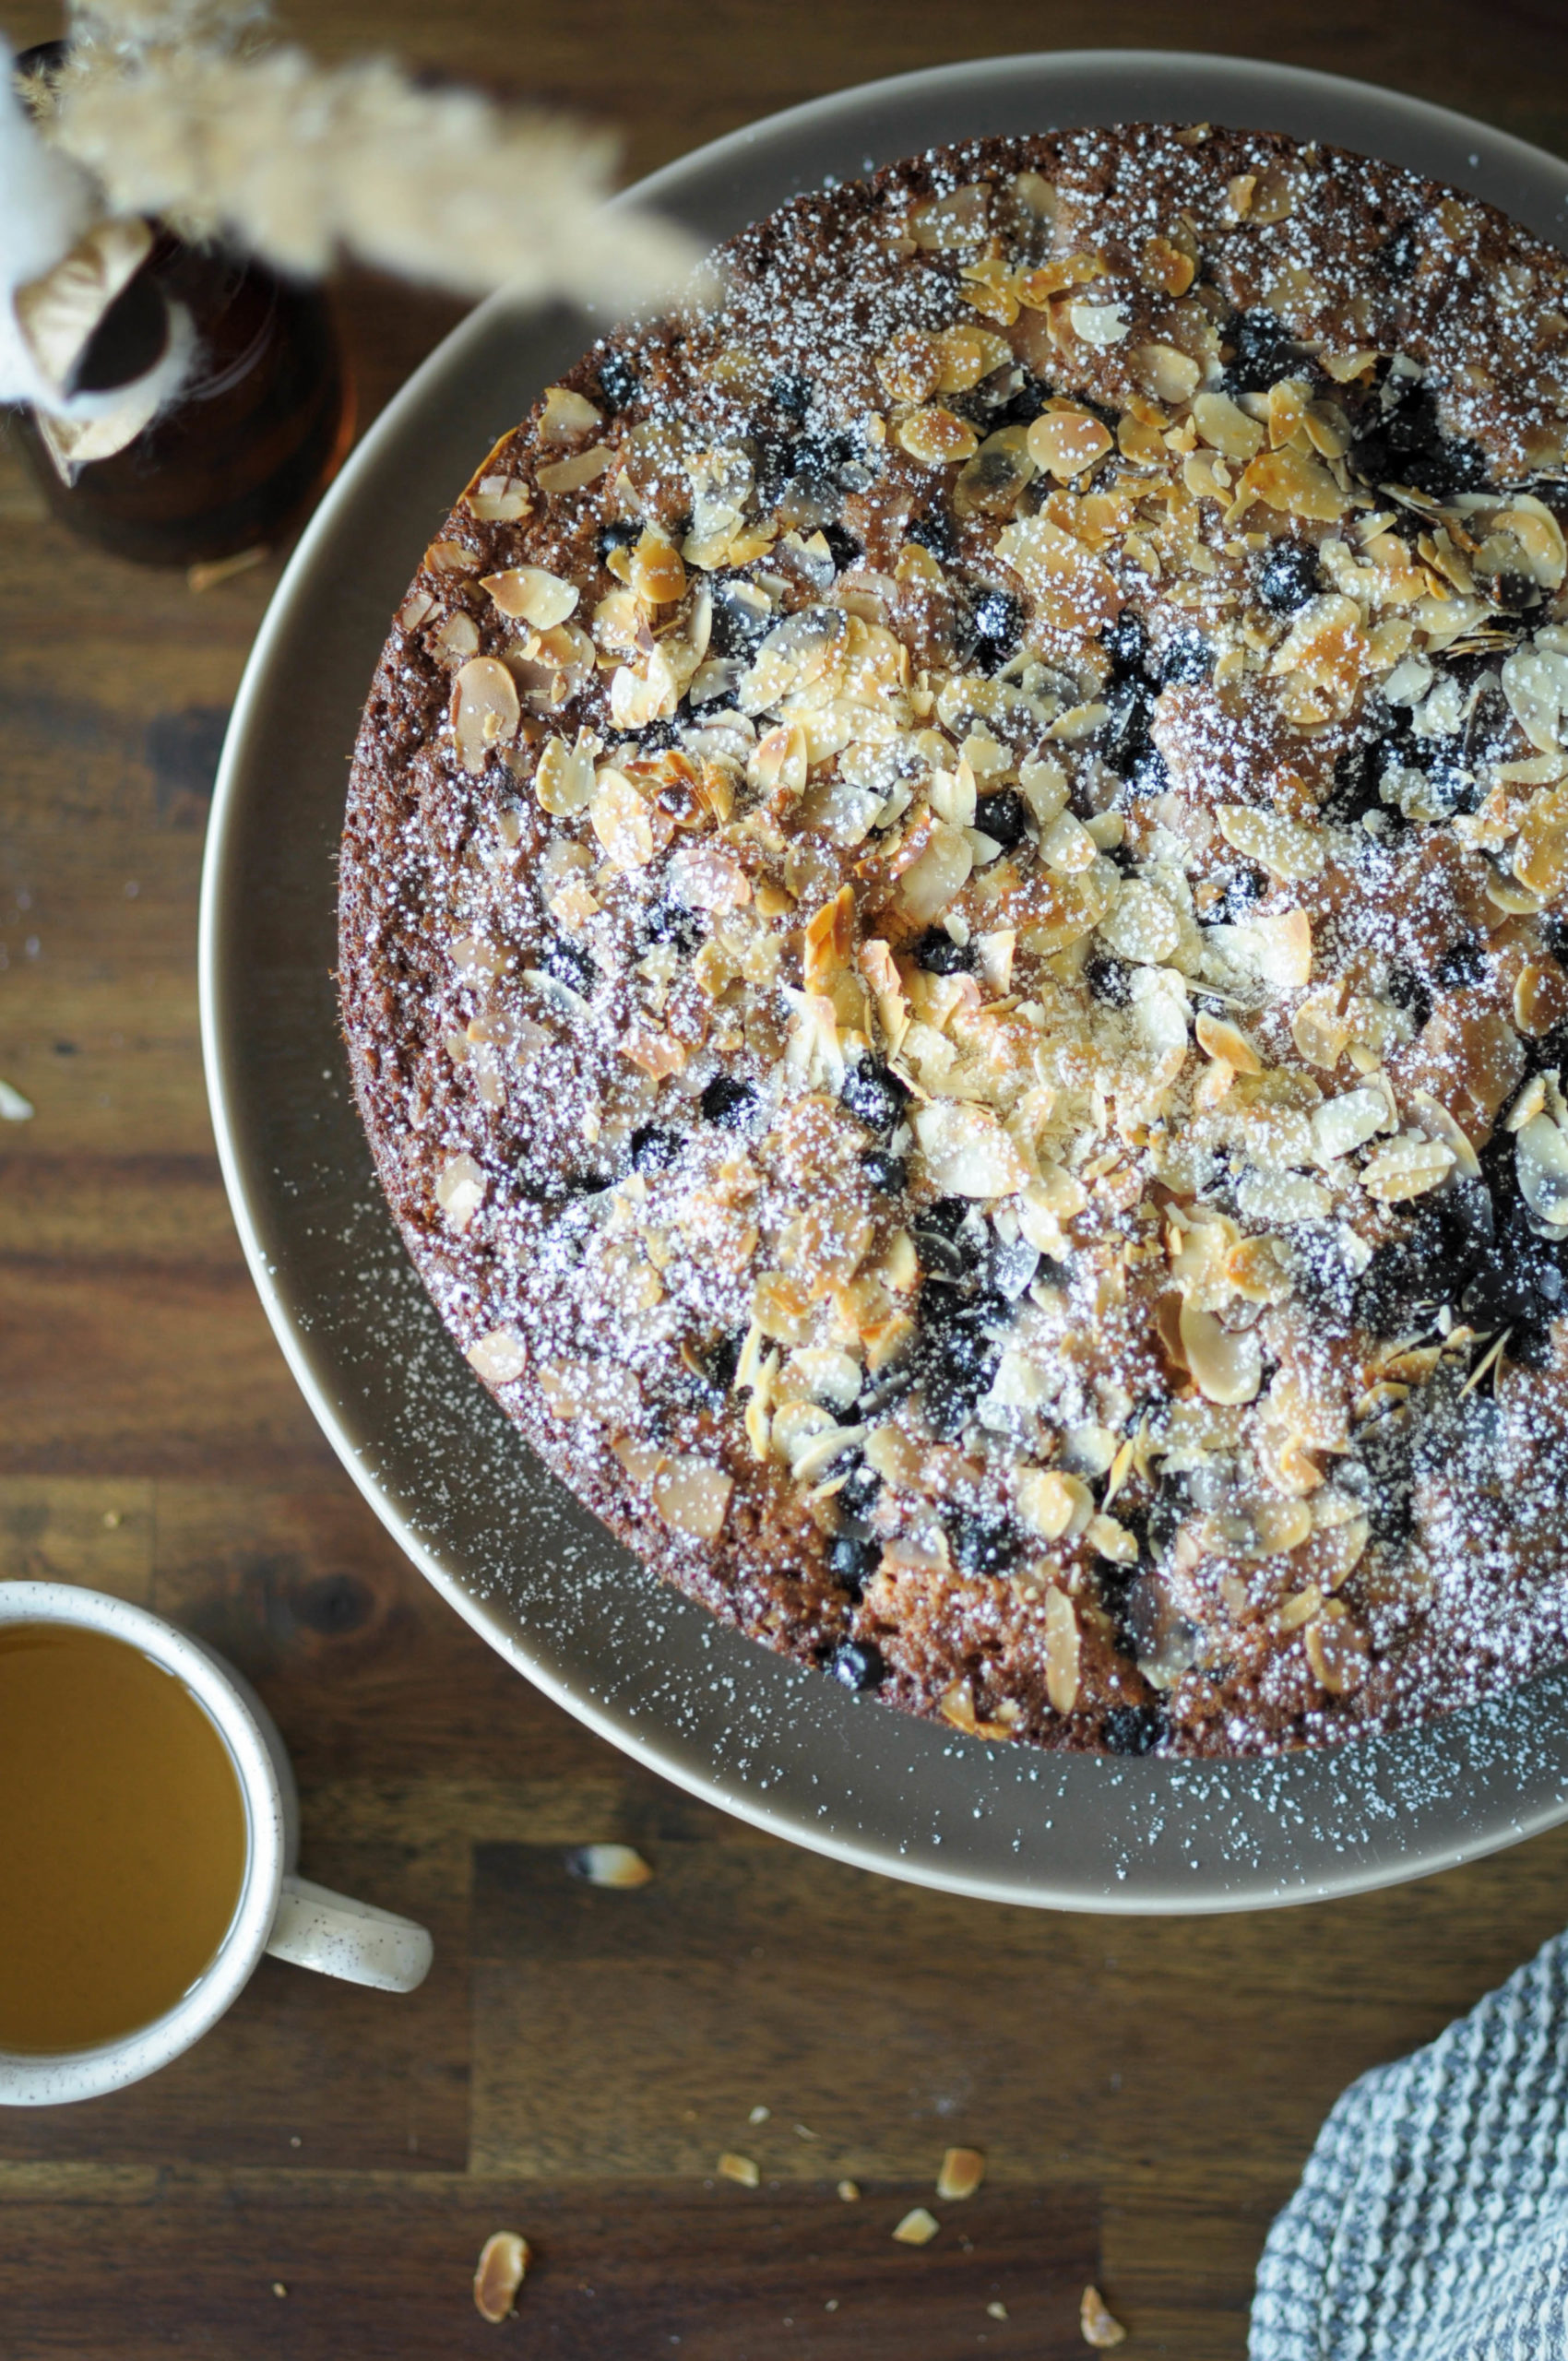 Coconut, Almond and Blueberry Cake